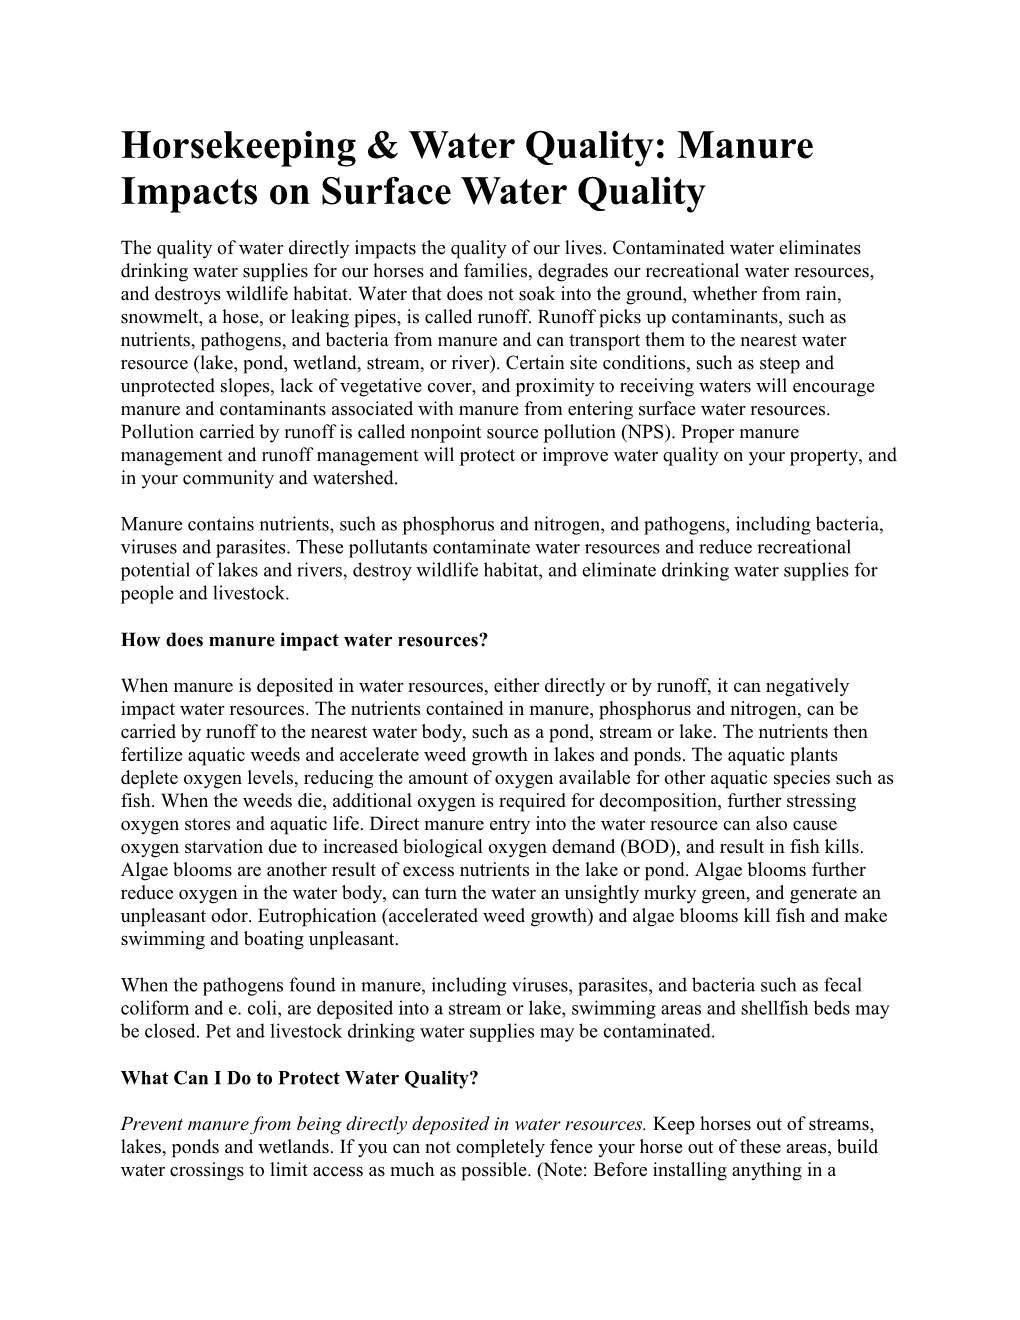 Horsekeeping & Water Quality: Manure Impacts on Surface